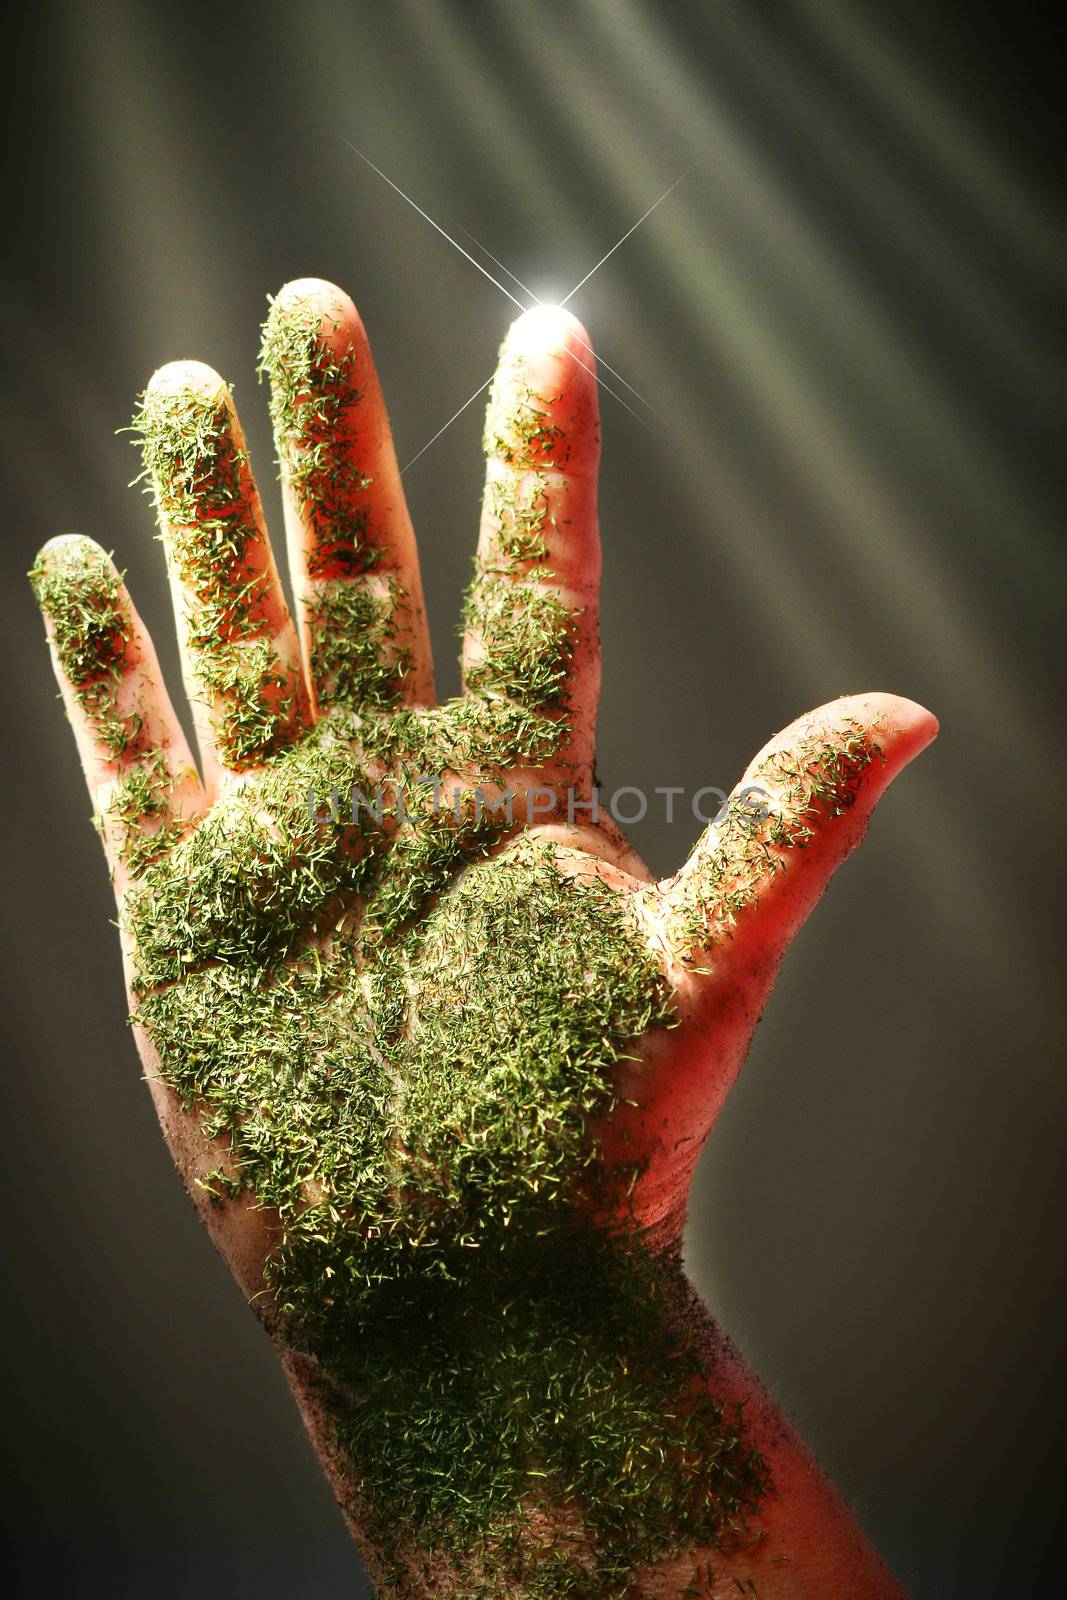 Open hand with green substance against dark background